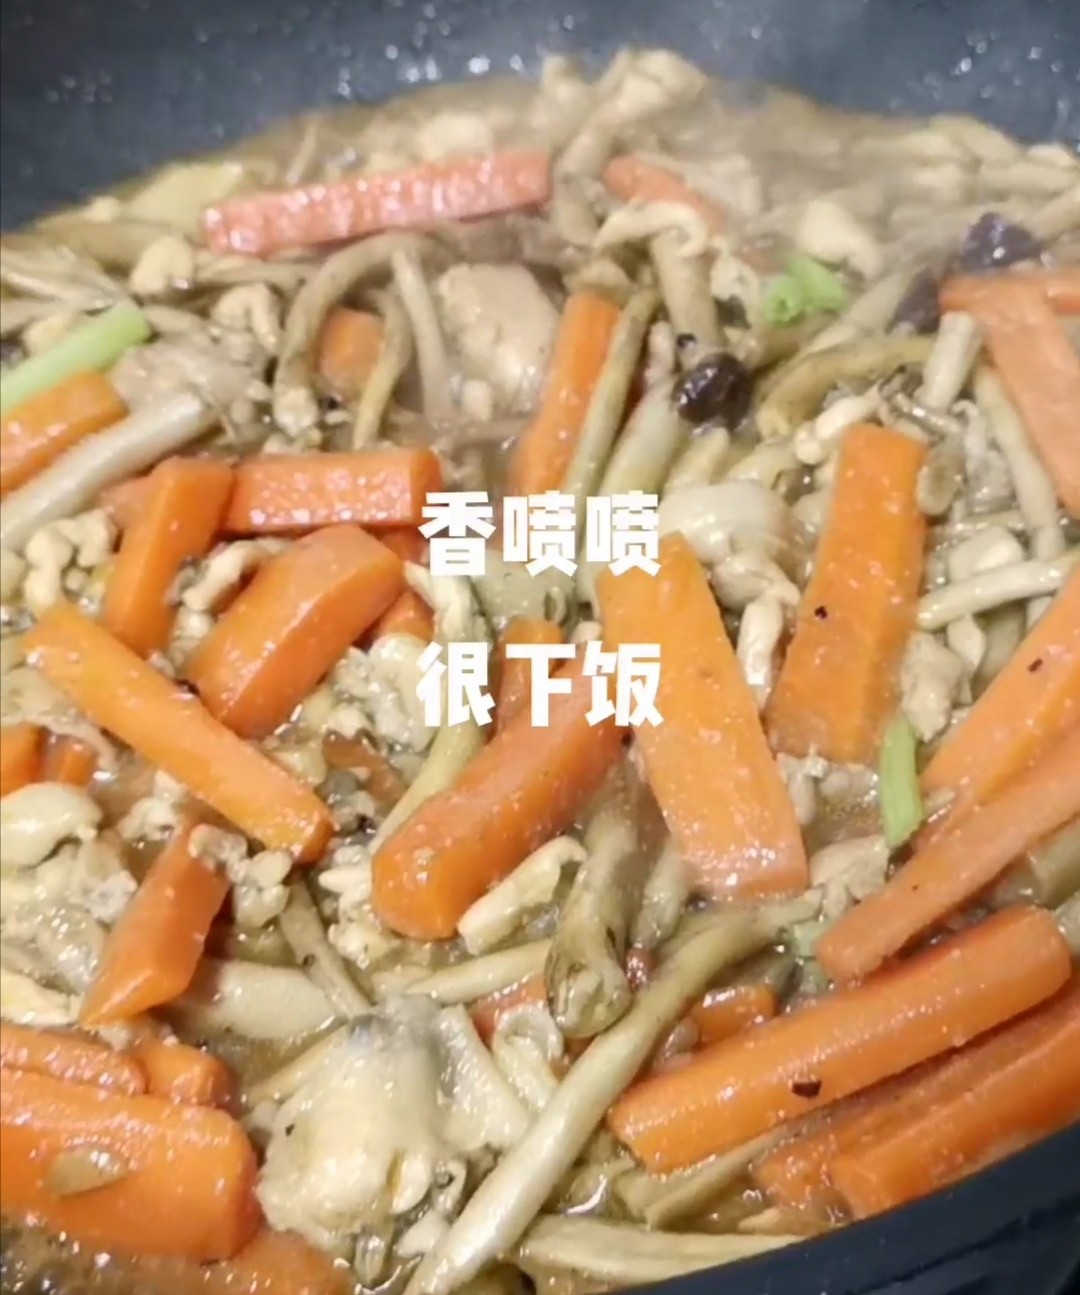 Stir-fried Chicken with Chashu Mushroom and Carrots recipe